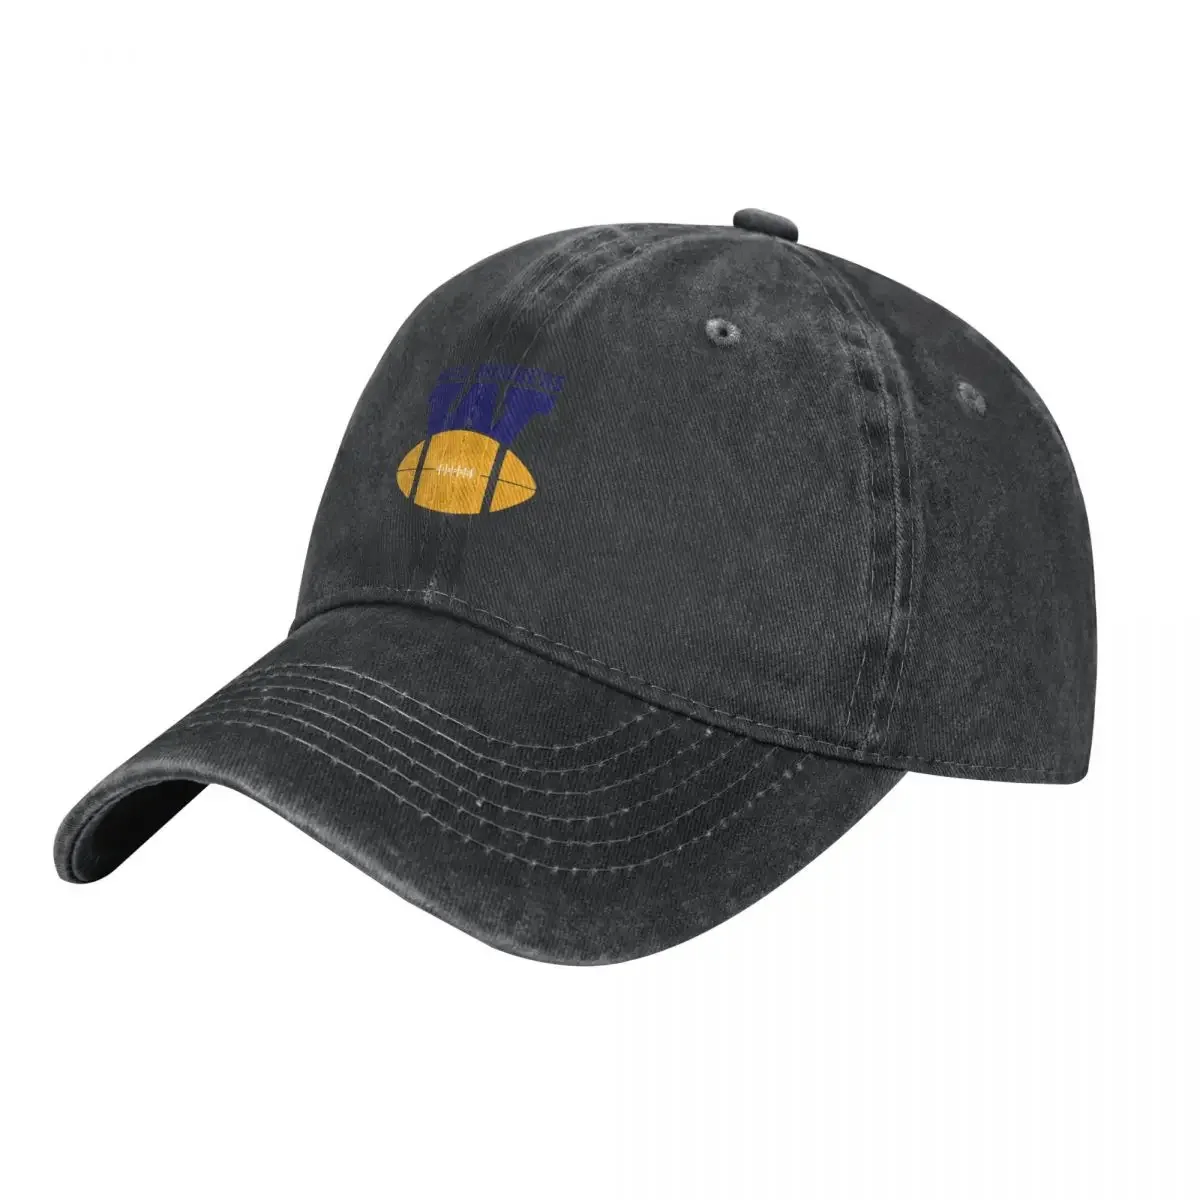 

It's The Gift To Big Fan Of 'BOmBER's For The New Season 2021 Funny Cowboy Hat Golf Icon Beach Baseball Caps for Men Women